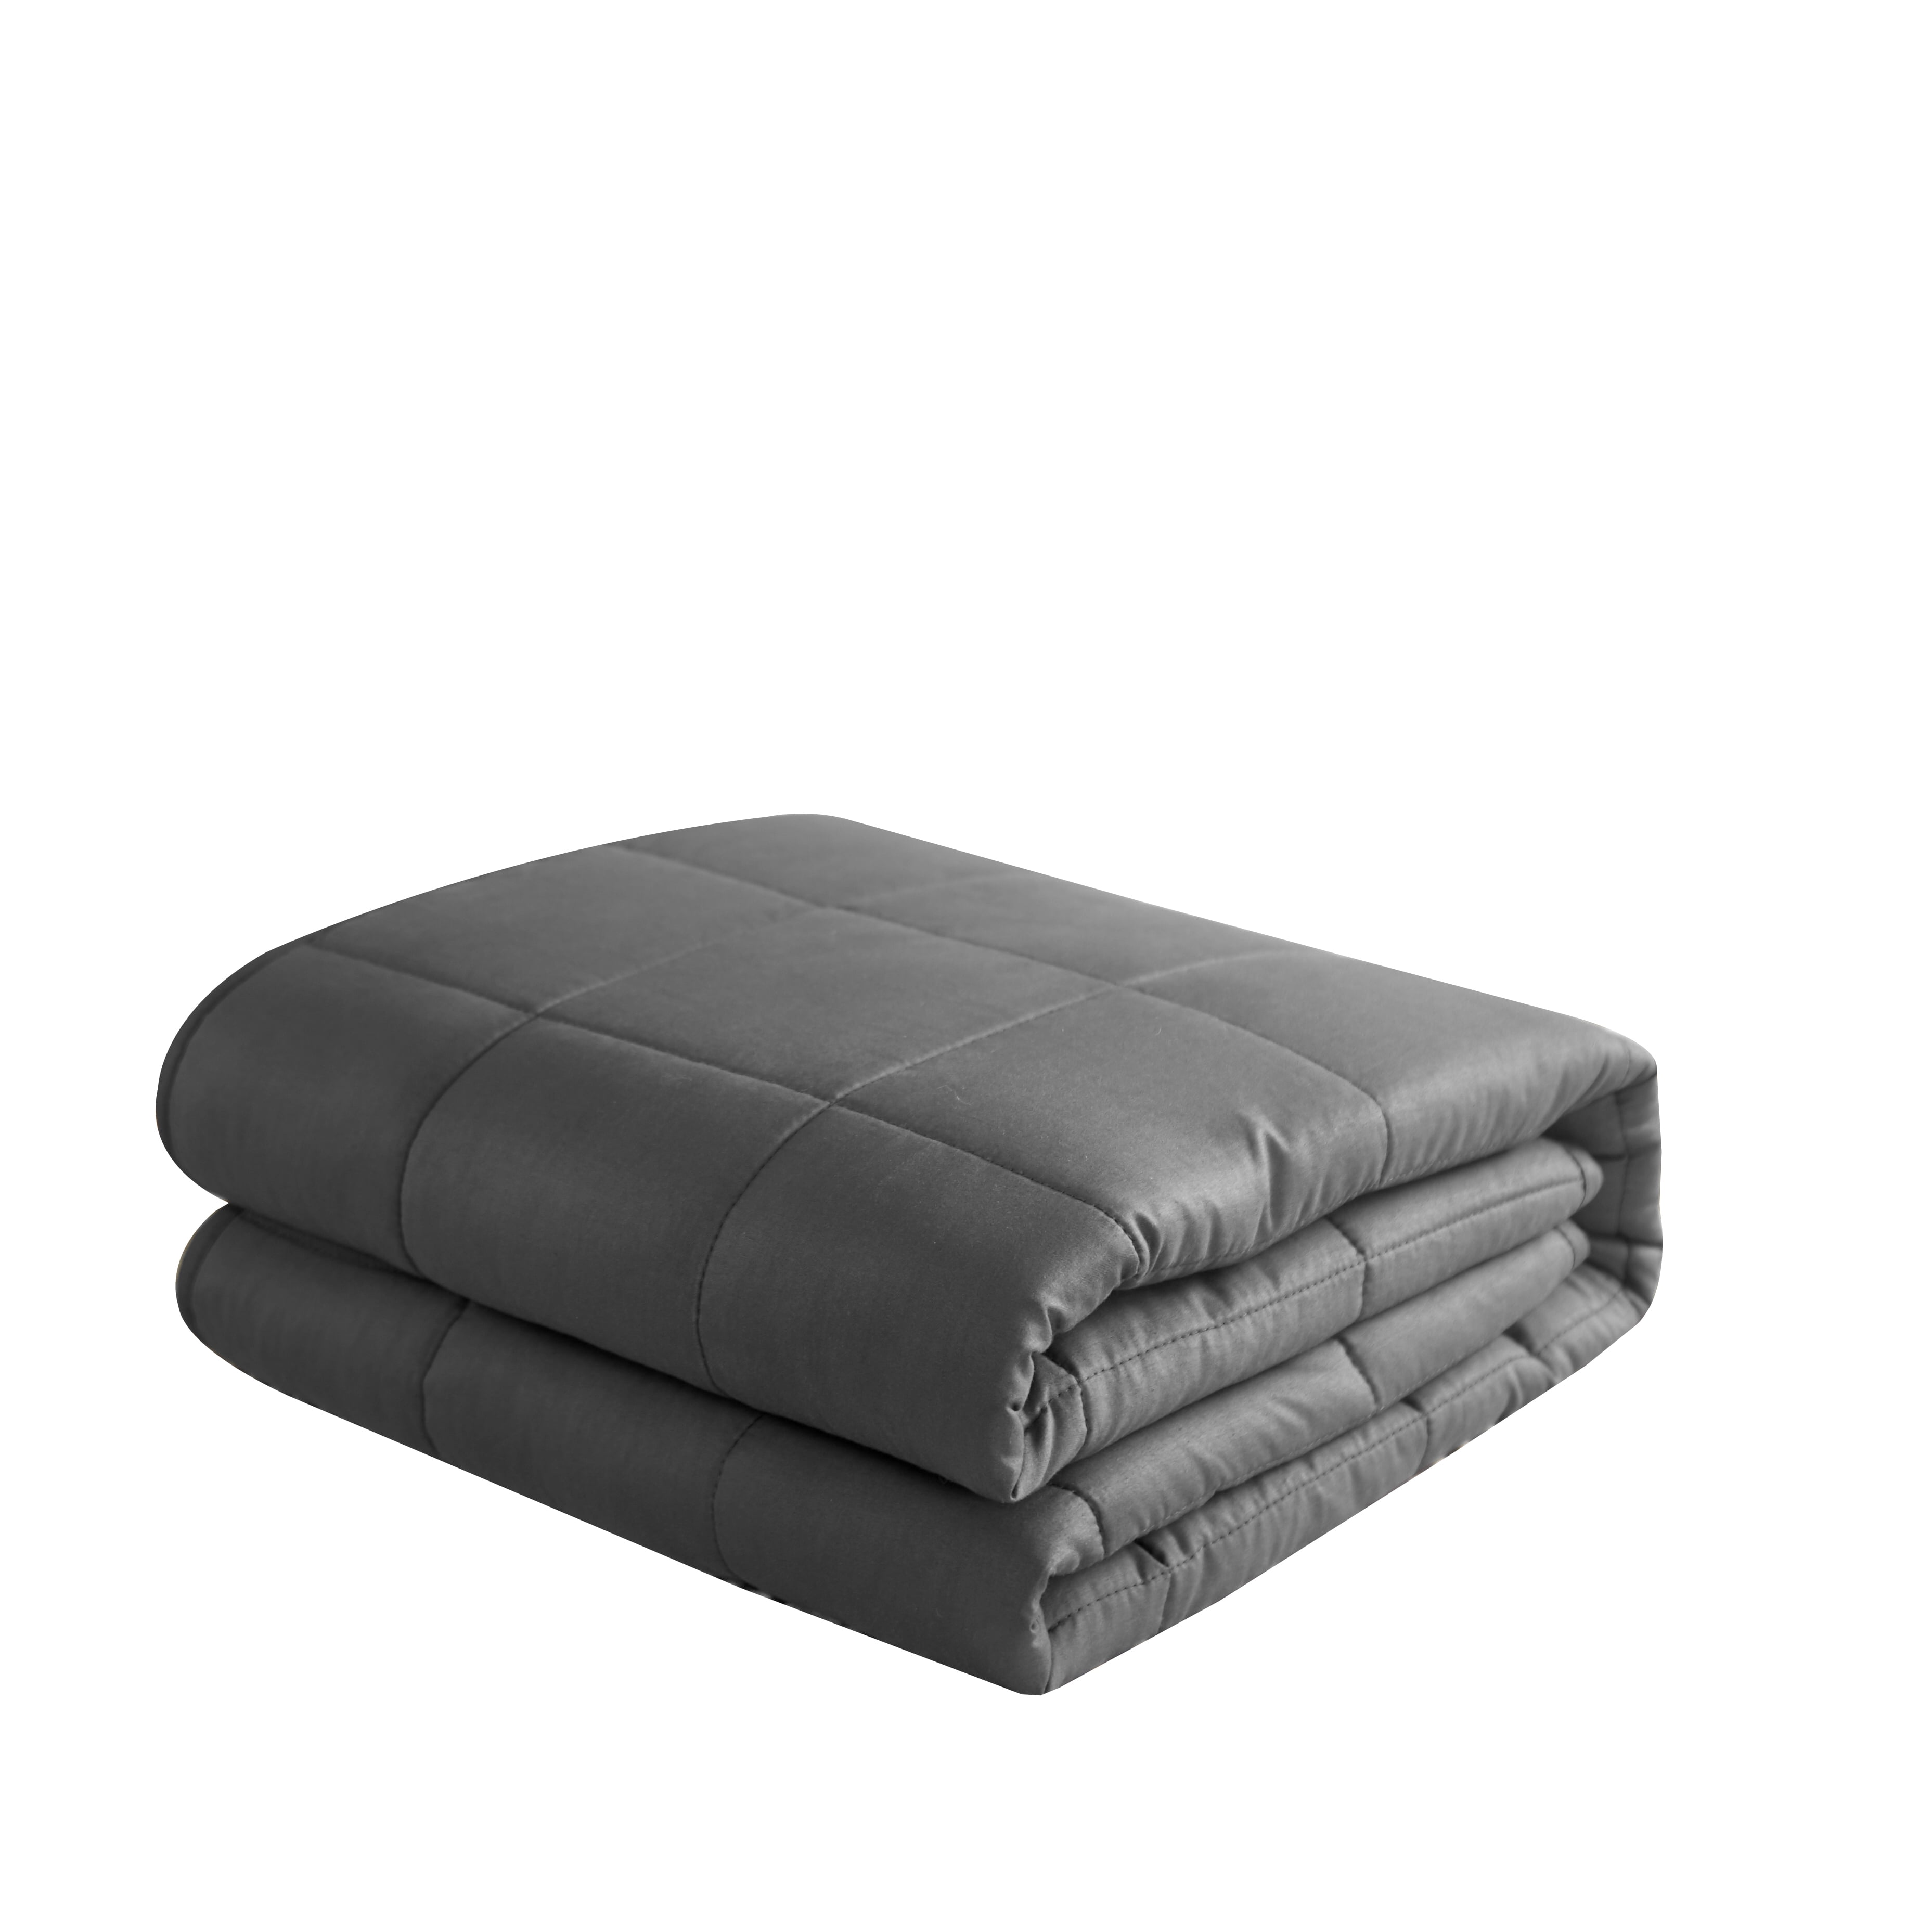 Pendleton Weighted Blanket Gray 20 lb 